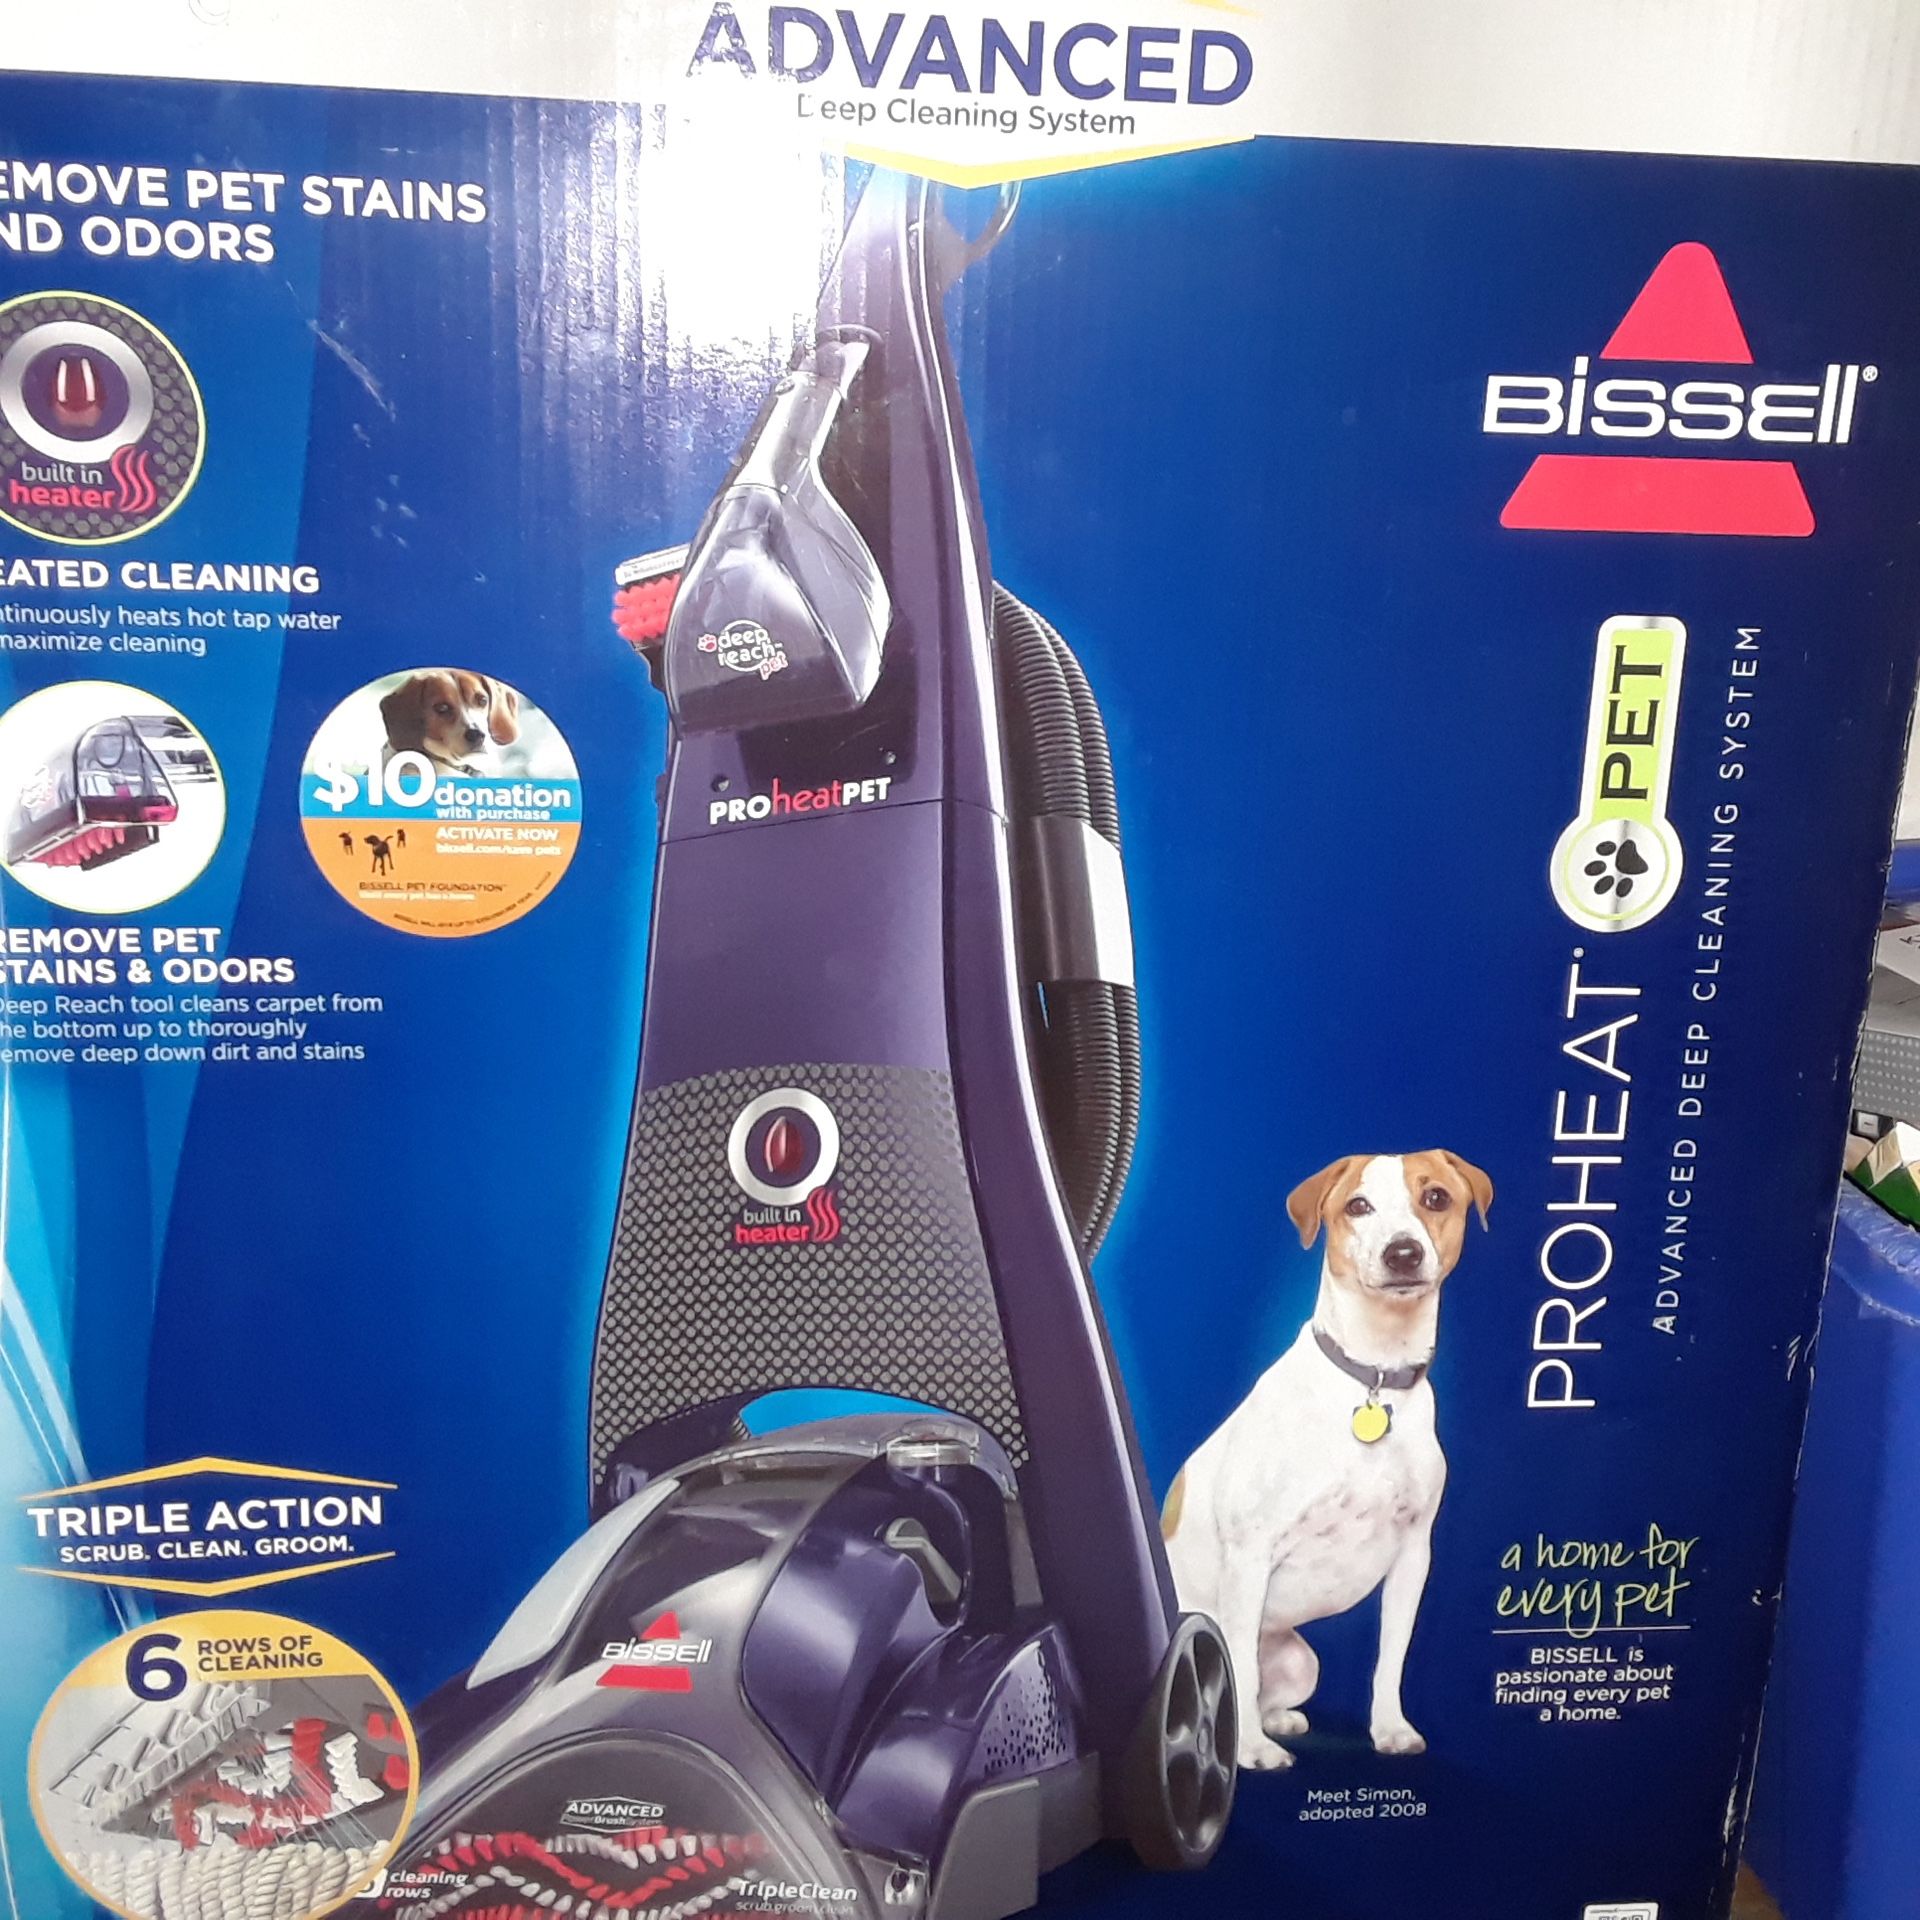 Bissell ProHeat Carpet Cleaner- Brand New Never Used In Original Box